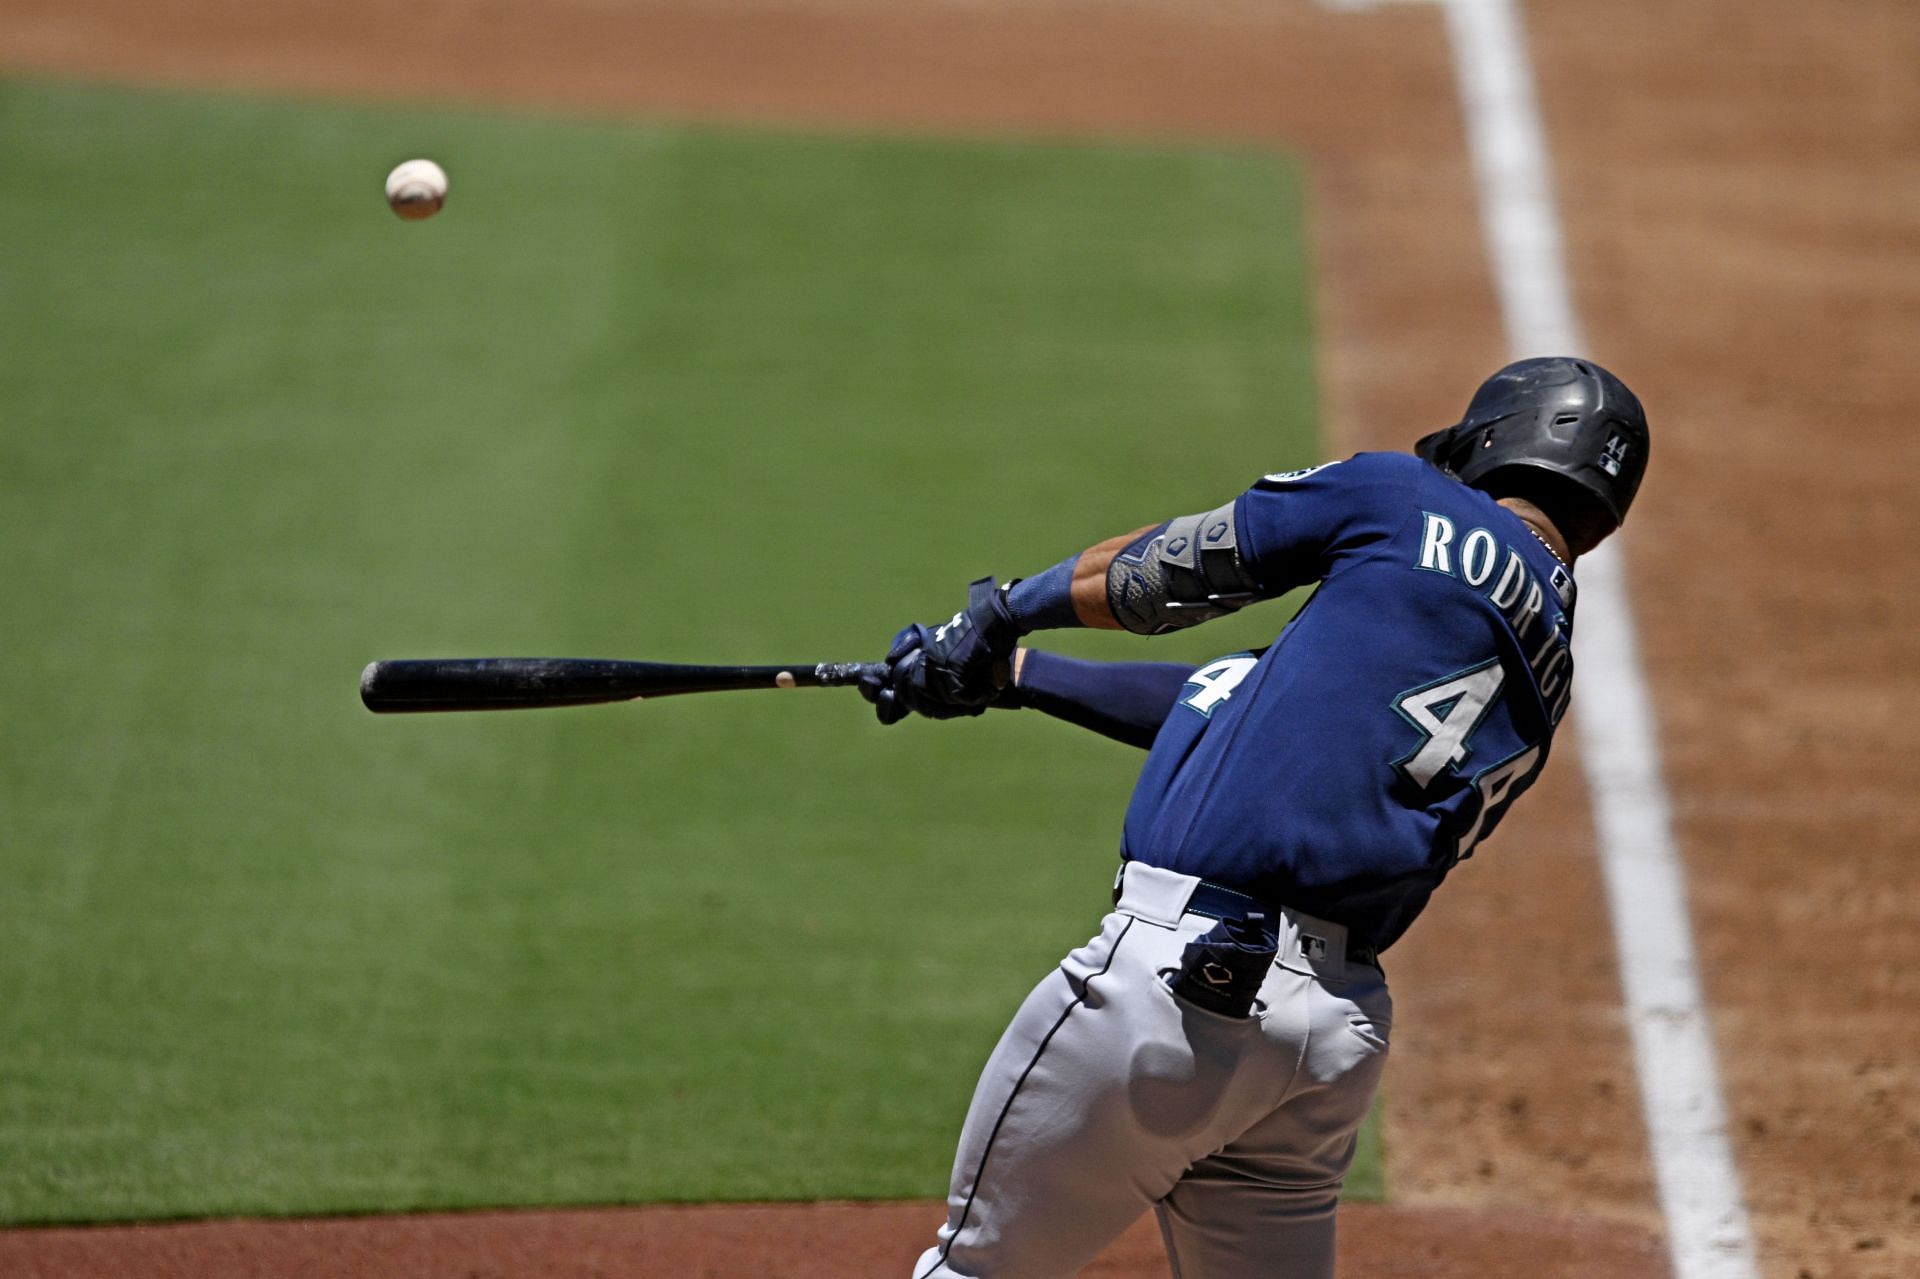 Seattle Mariners rookie outfielder Julio Rodriguez has driven in 43 runs this season and scored 47